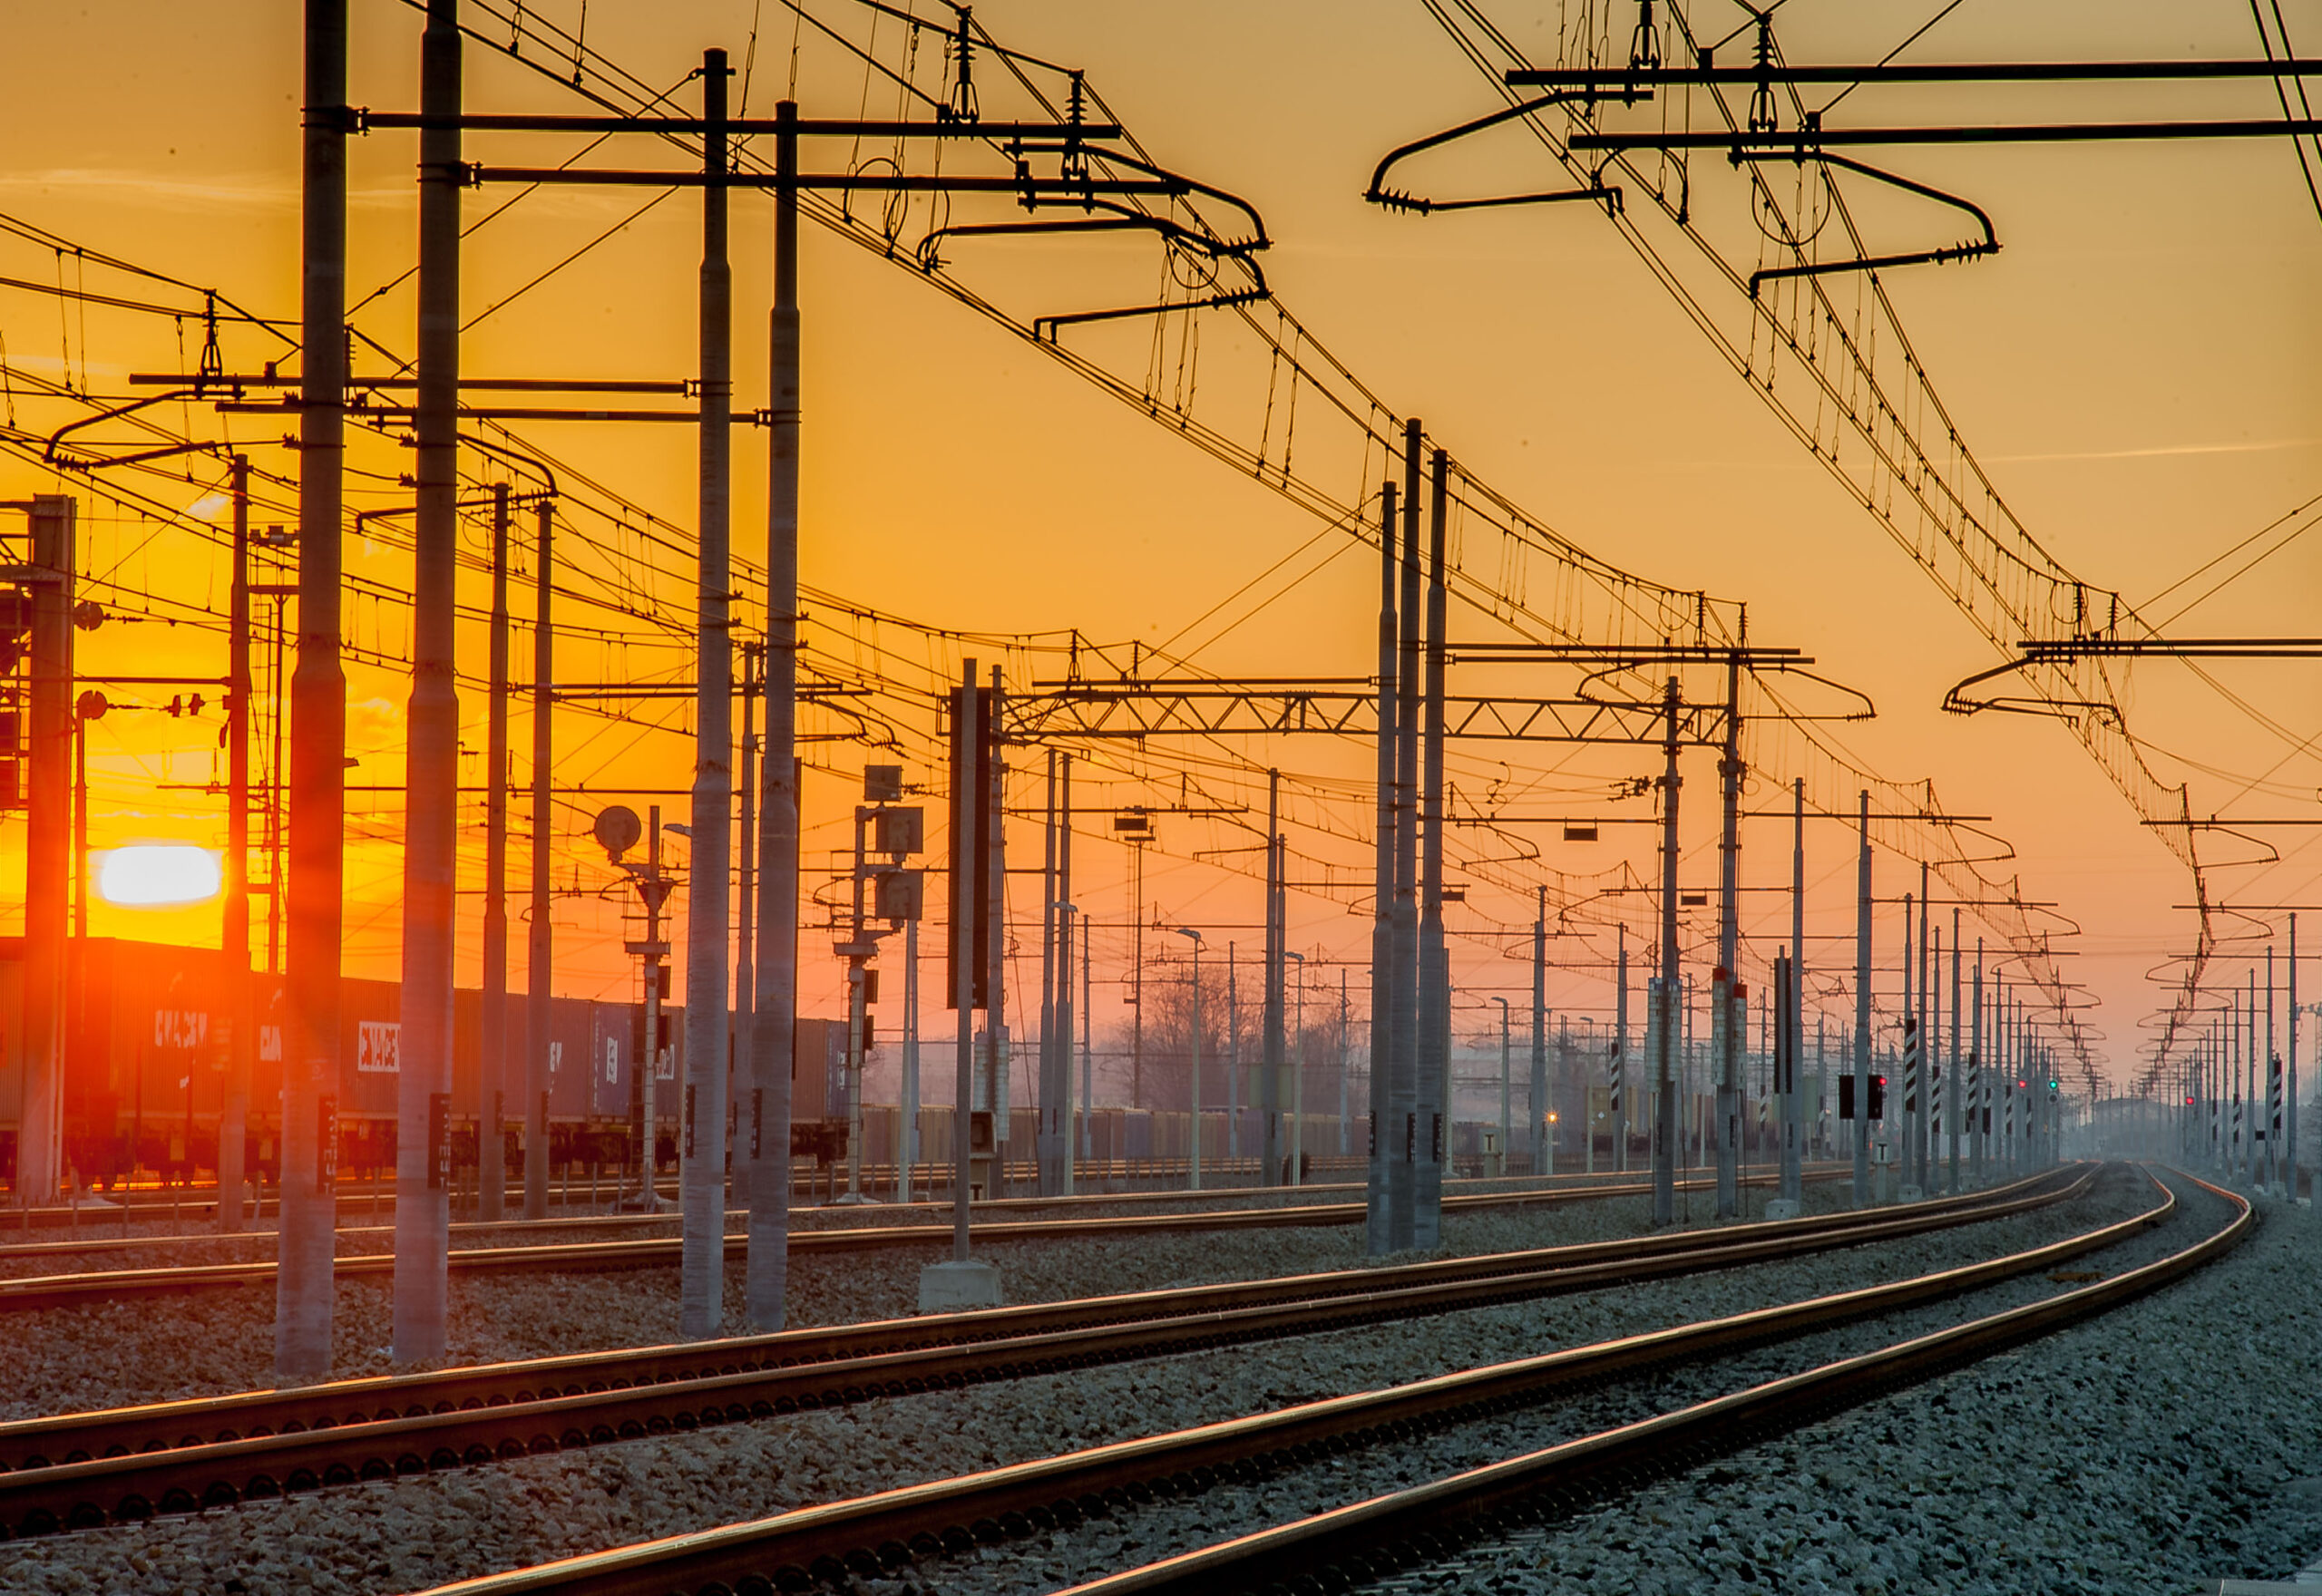 Lightning Protection Strategies for Overhead Rail Electrification